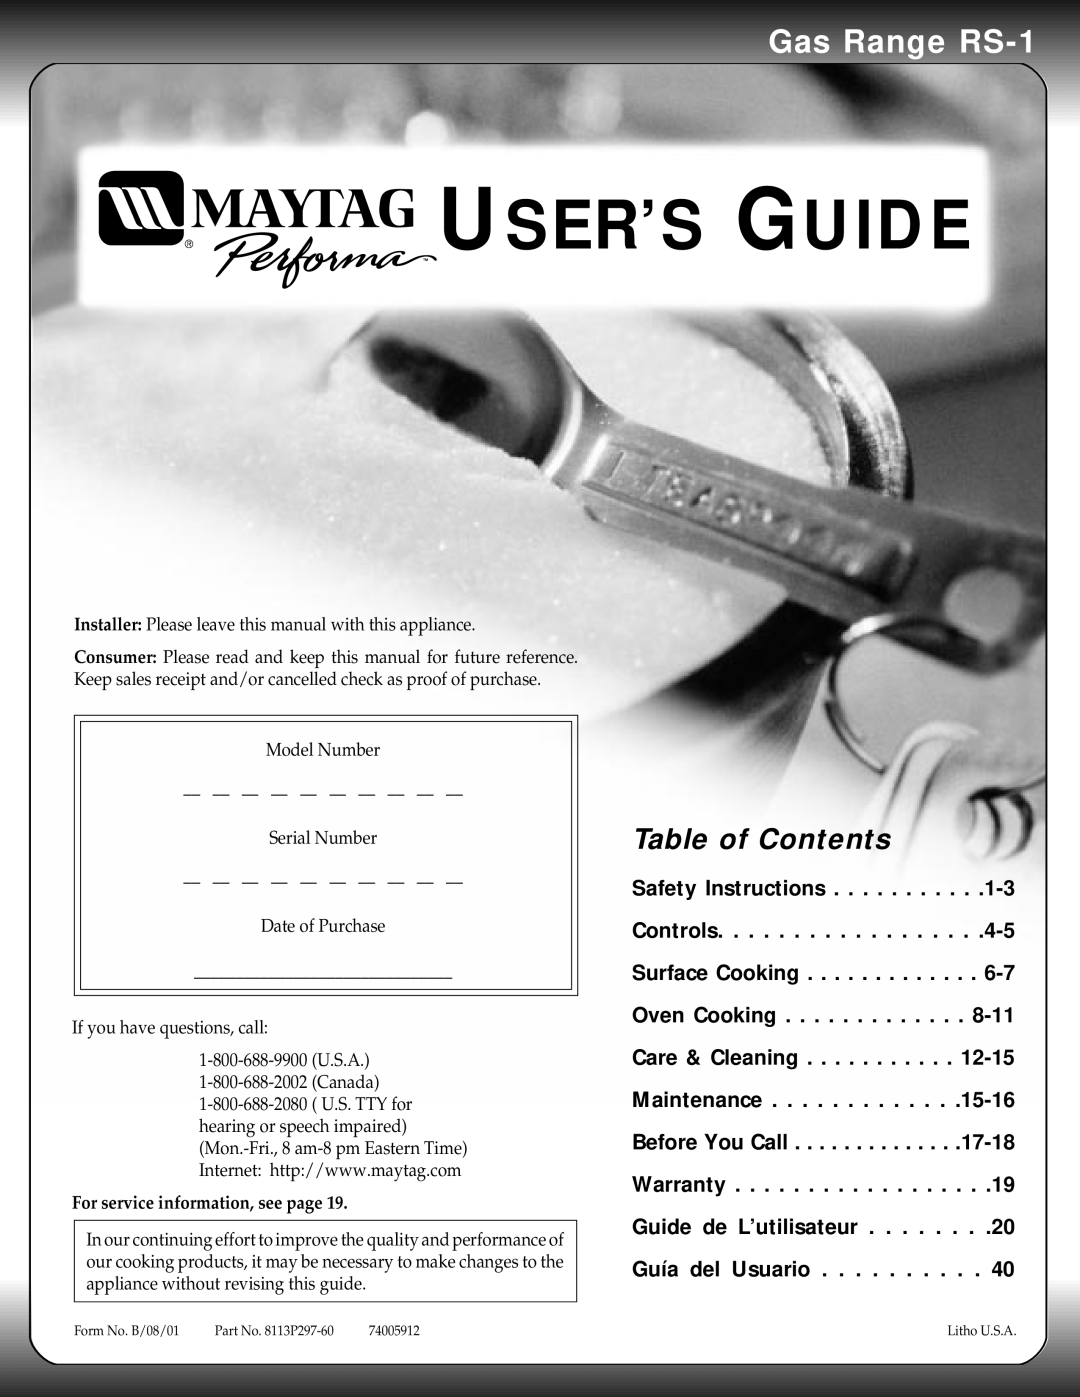 Maytag manual Gas Range RS-1, Table of Contents, User’S Guide 